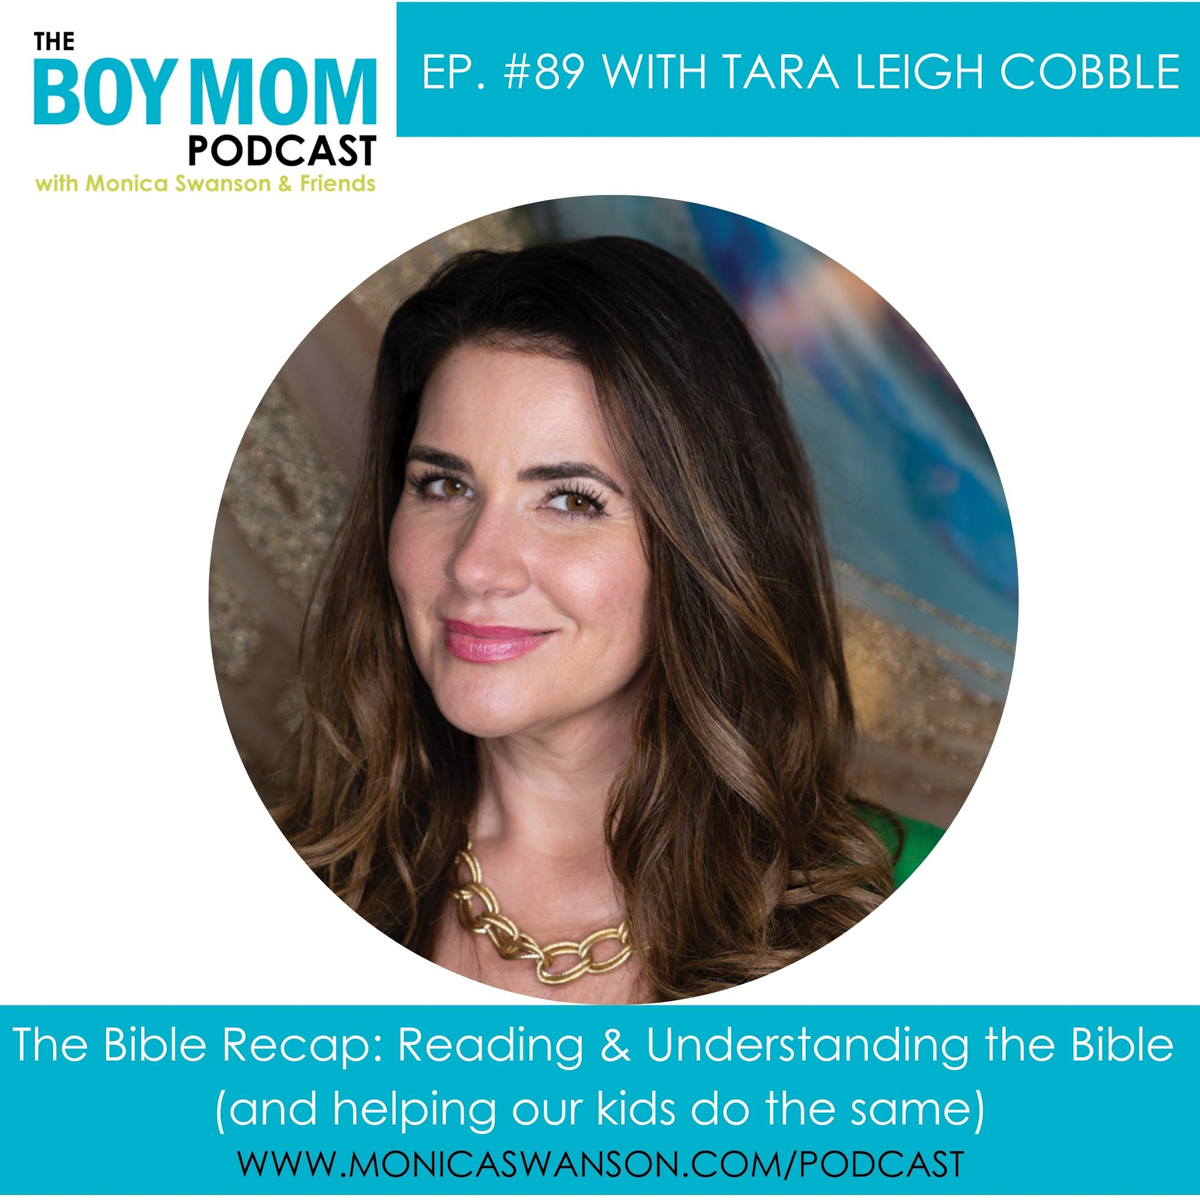 Read and Understand the Bible – and Help Your Kids do the Same {Ep. 89 with Tara Leigh Cobble}